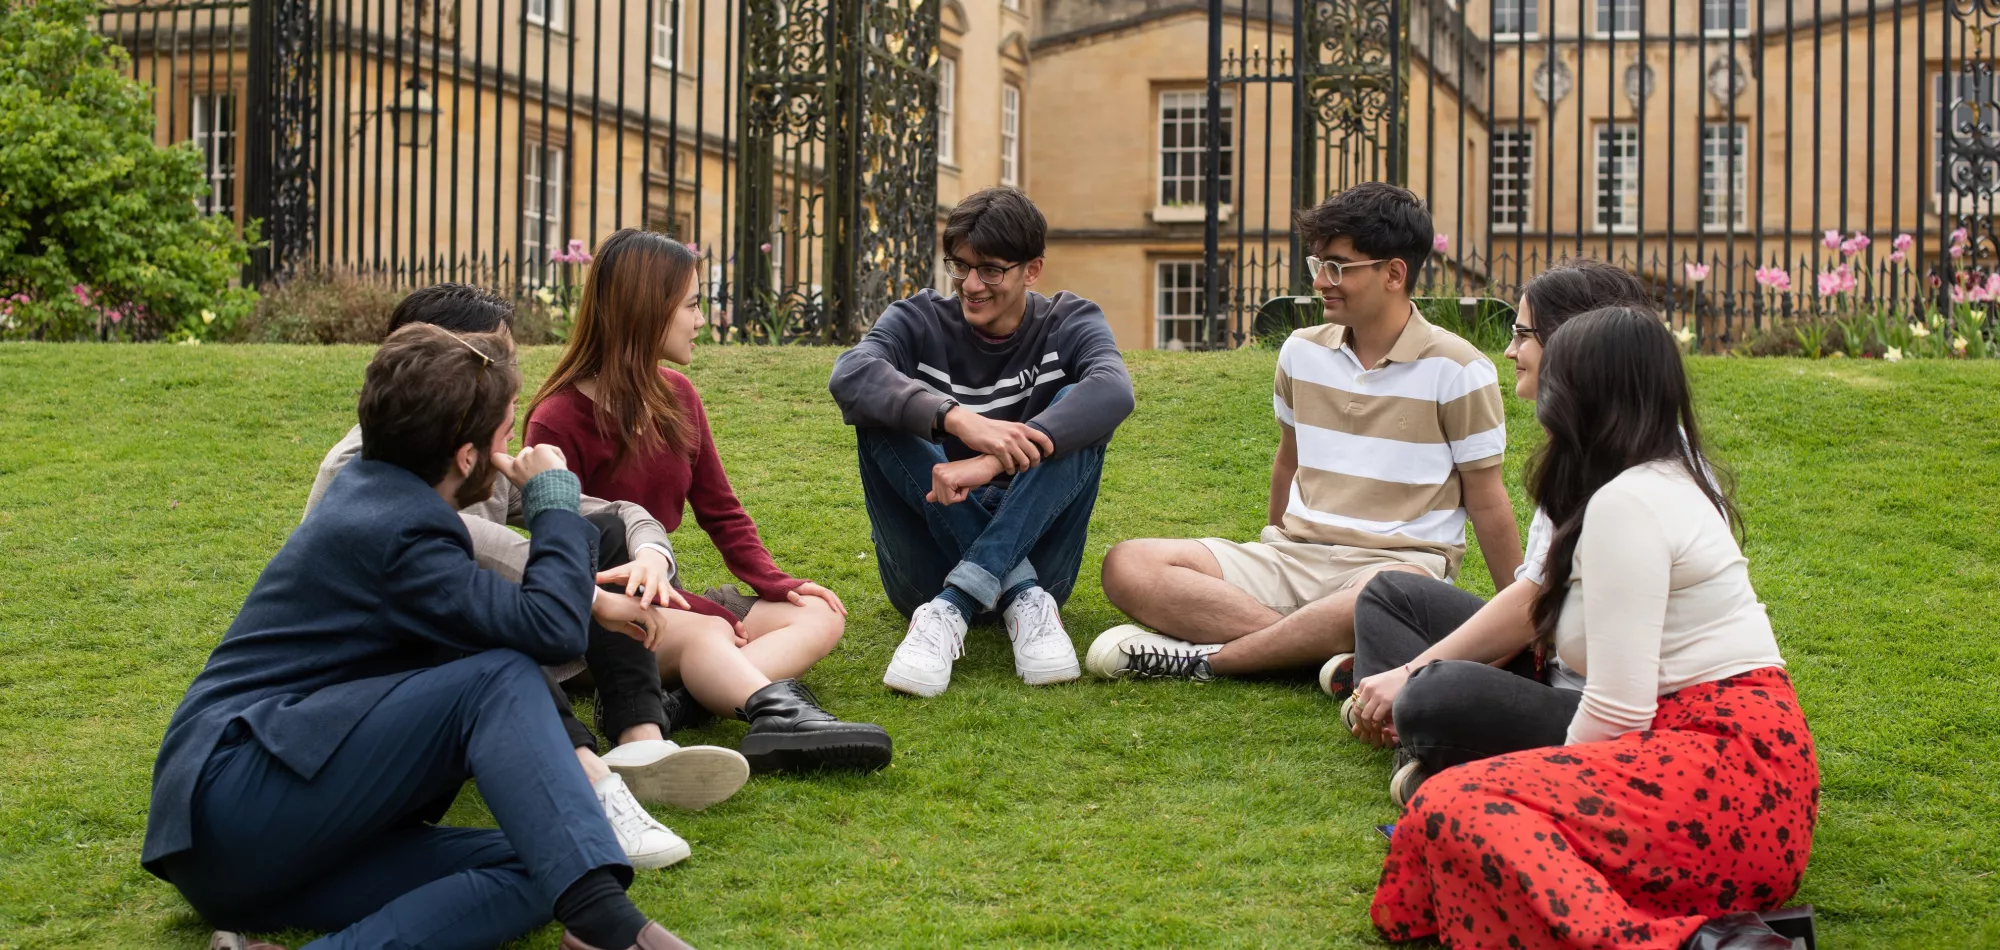 Students sitting on the grass in New College gardens